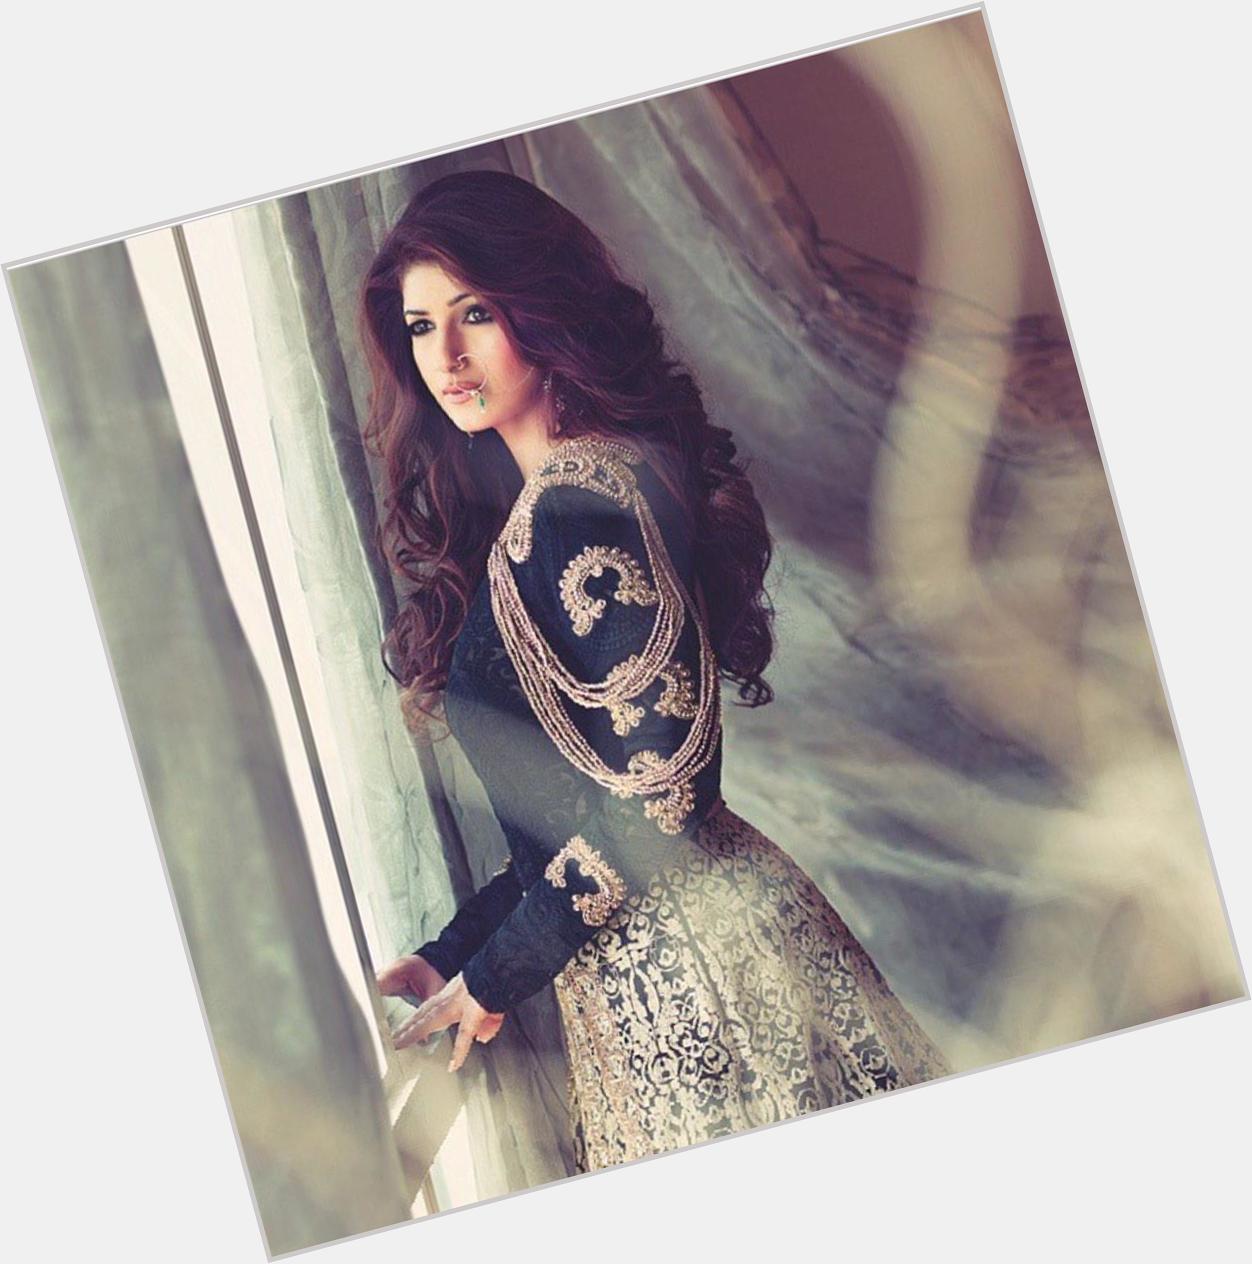 Happy Birthday to my birthday twin, Twinkle Khanna! Hope you have an amazing day!   